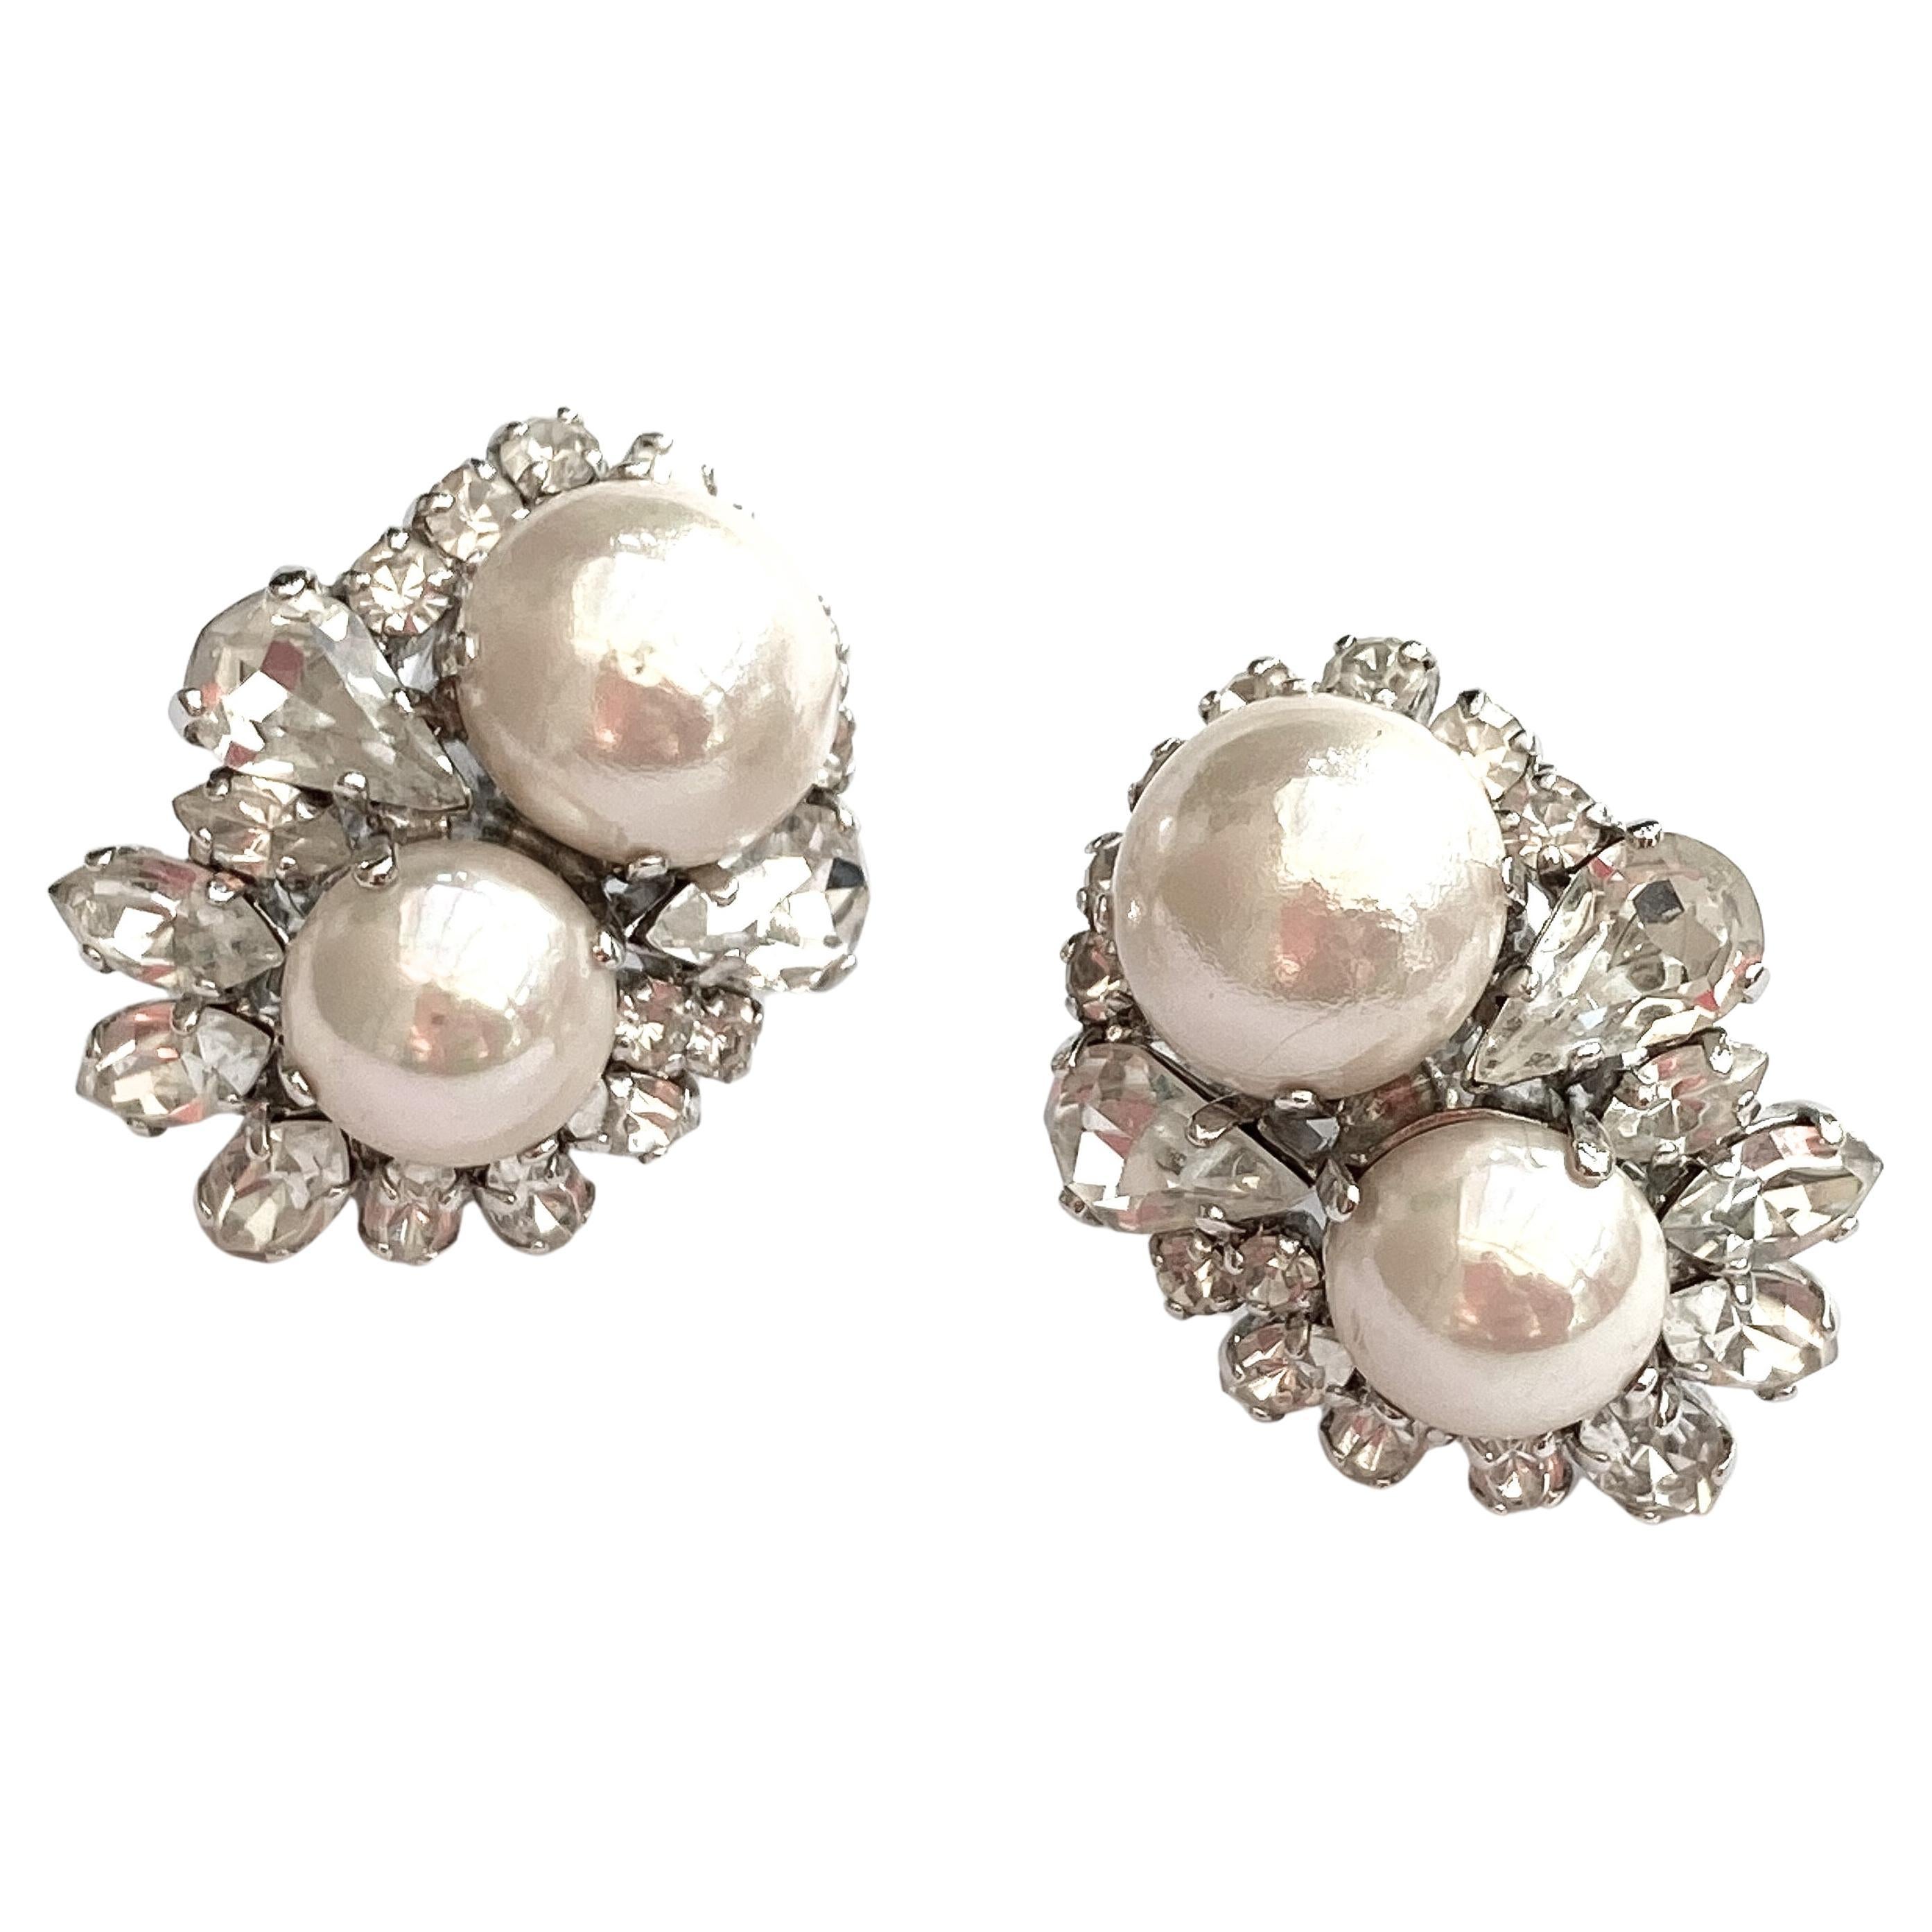 Simple, classic Dior - beautiful wearable 'cluster' style earrings from Christian Dior, made with Austrian pastes and rich faux pearls, sitting comfortably in their box. Designed in Paris but made in Germany by renowned Henkel and Grosse for Dior,